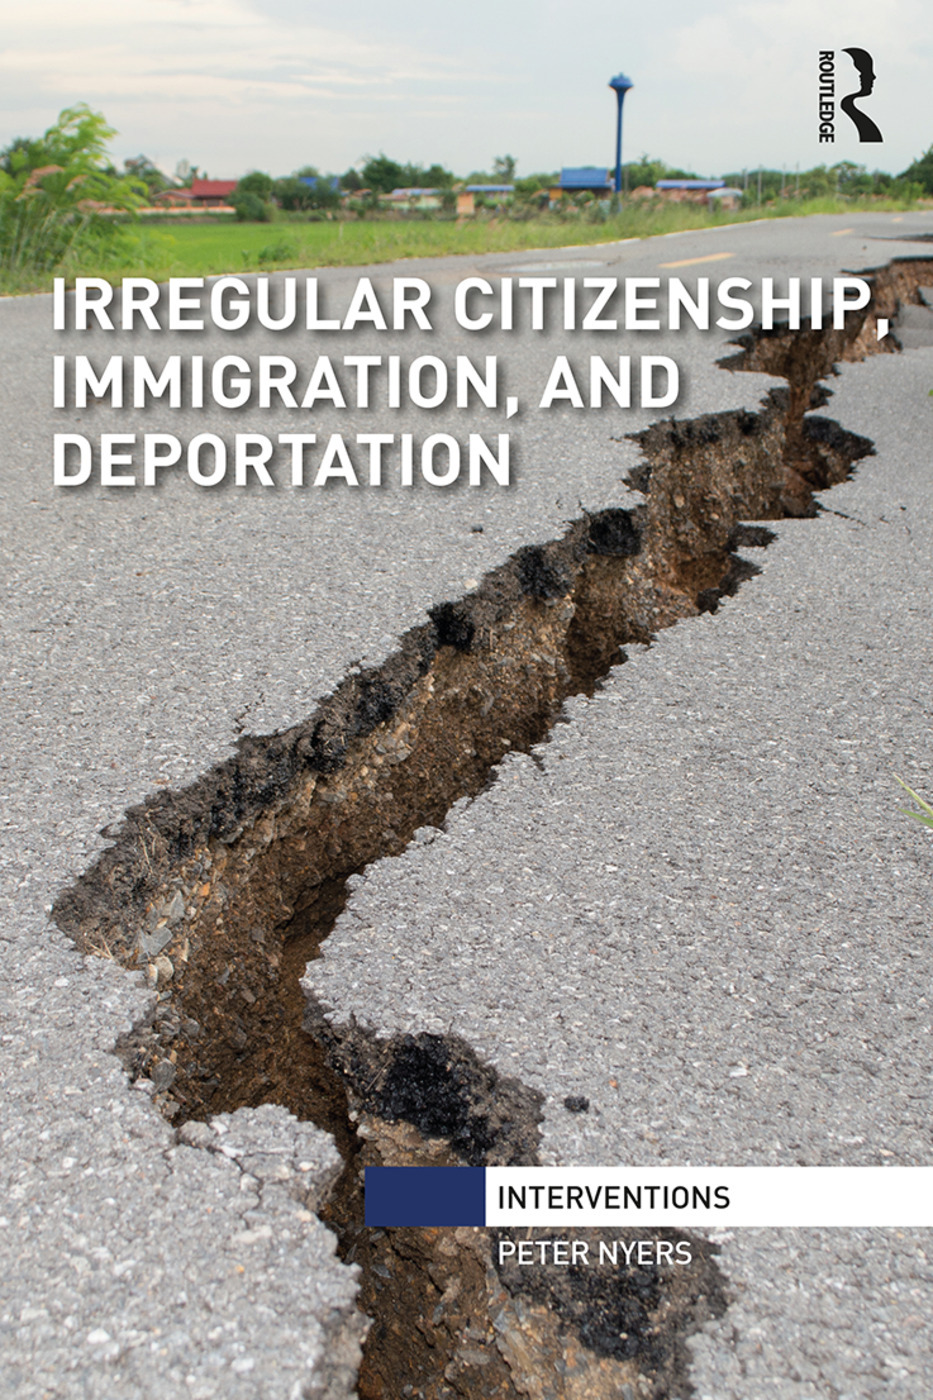 A picture of cracked asphalt road, book cover for "Irregular Citizenship, Immigration, and Deportation" by Peter Nyers